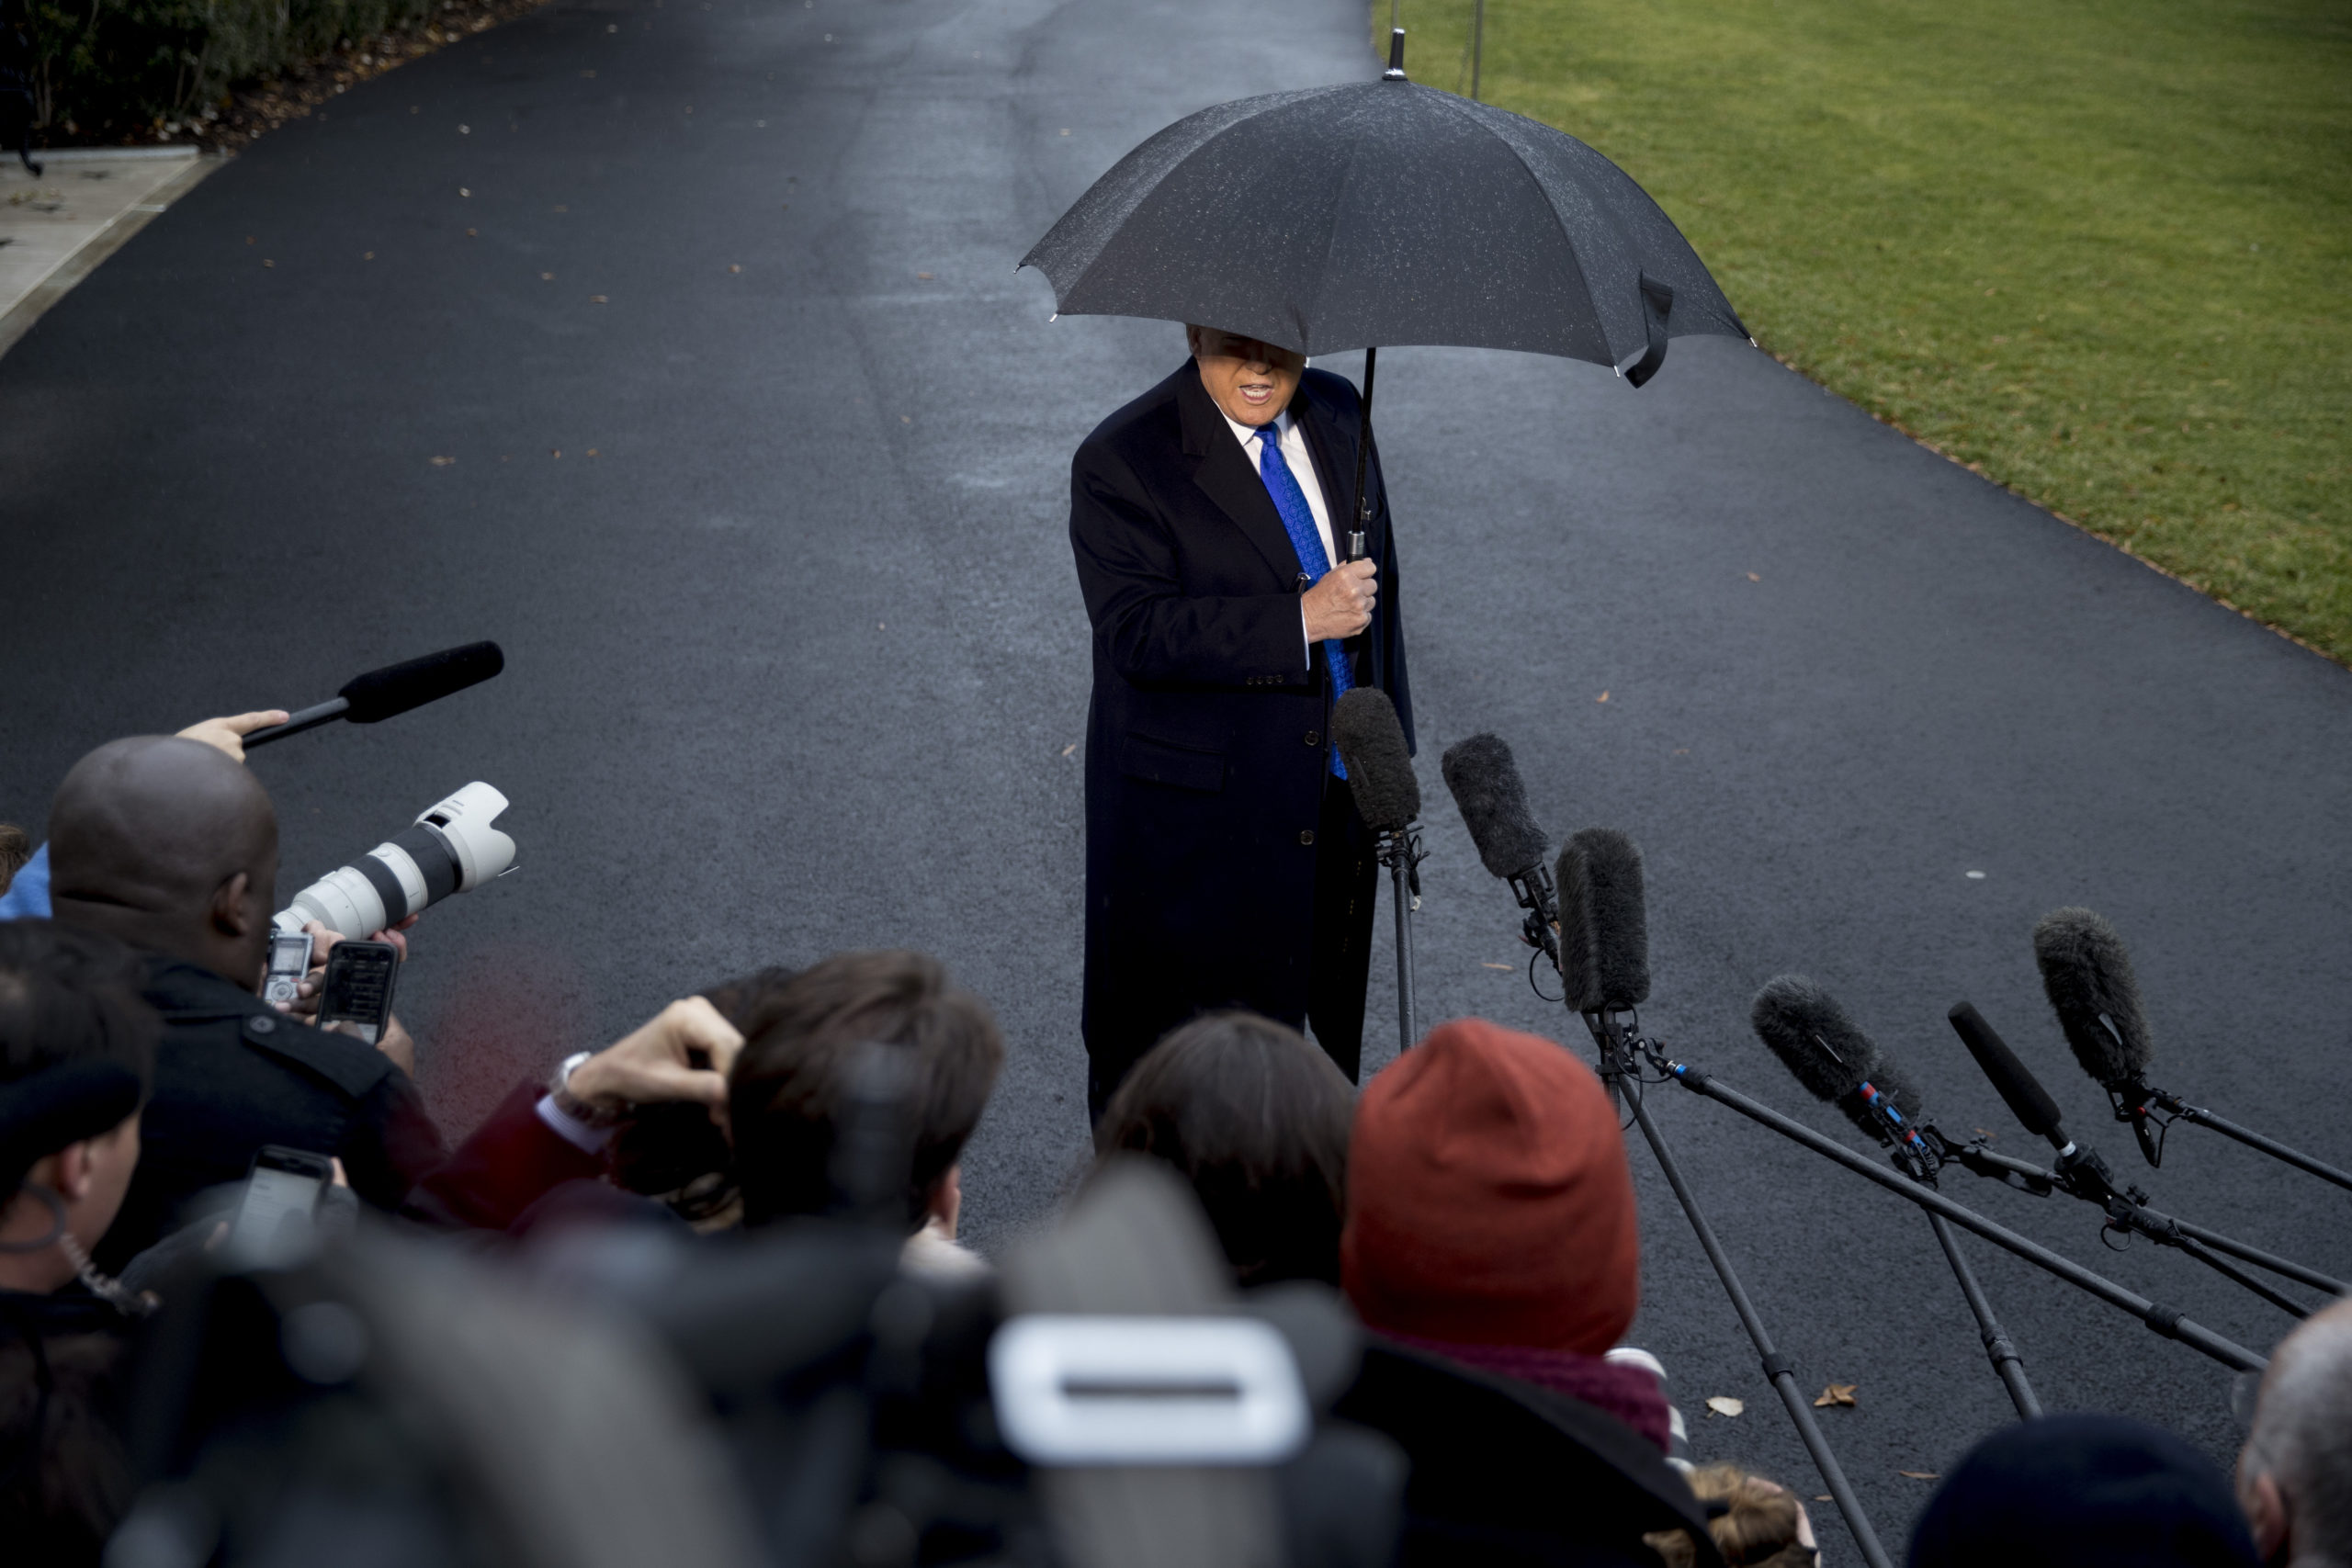 President Donald Trump looks into a crowd of media reporters, with their microphones extended out at him. It is gloomy, and Trump is sporting an umbrella that covers much of his face